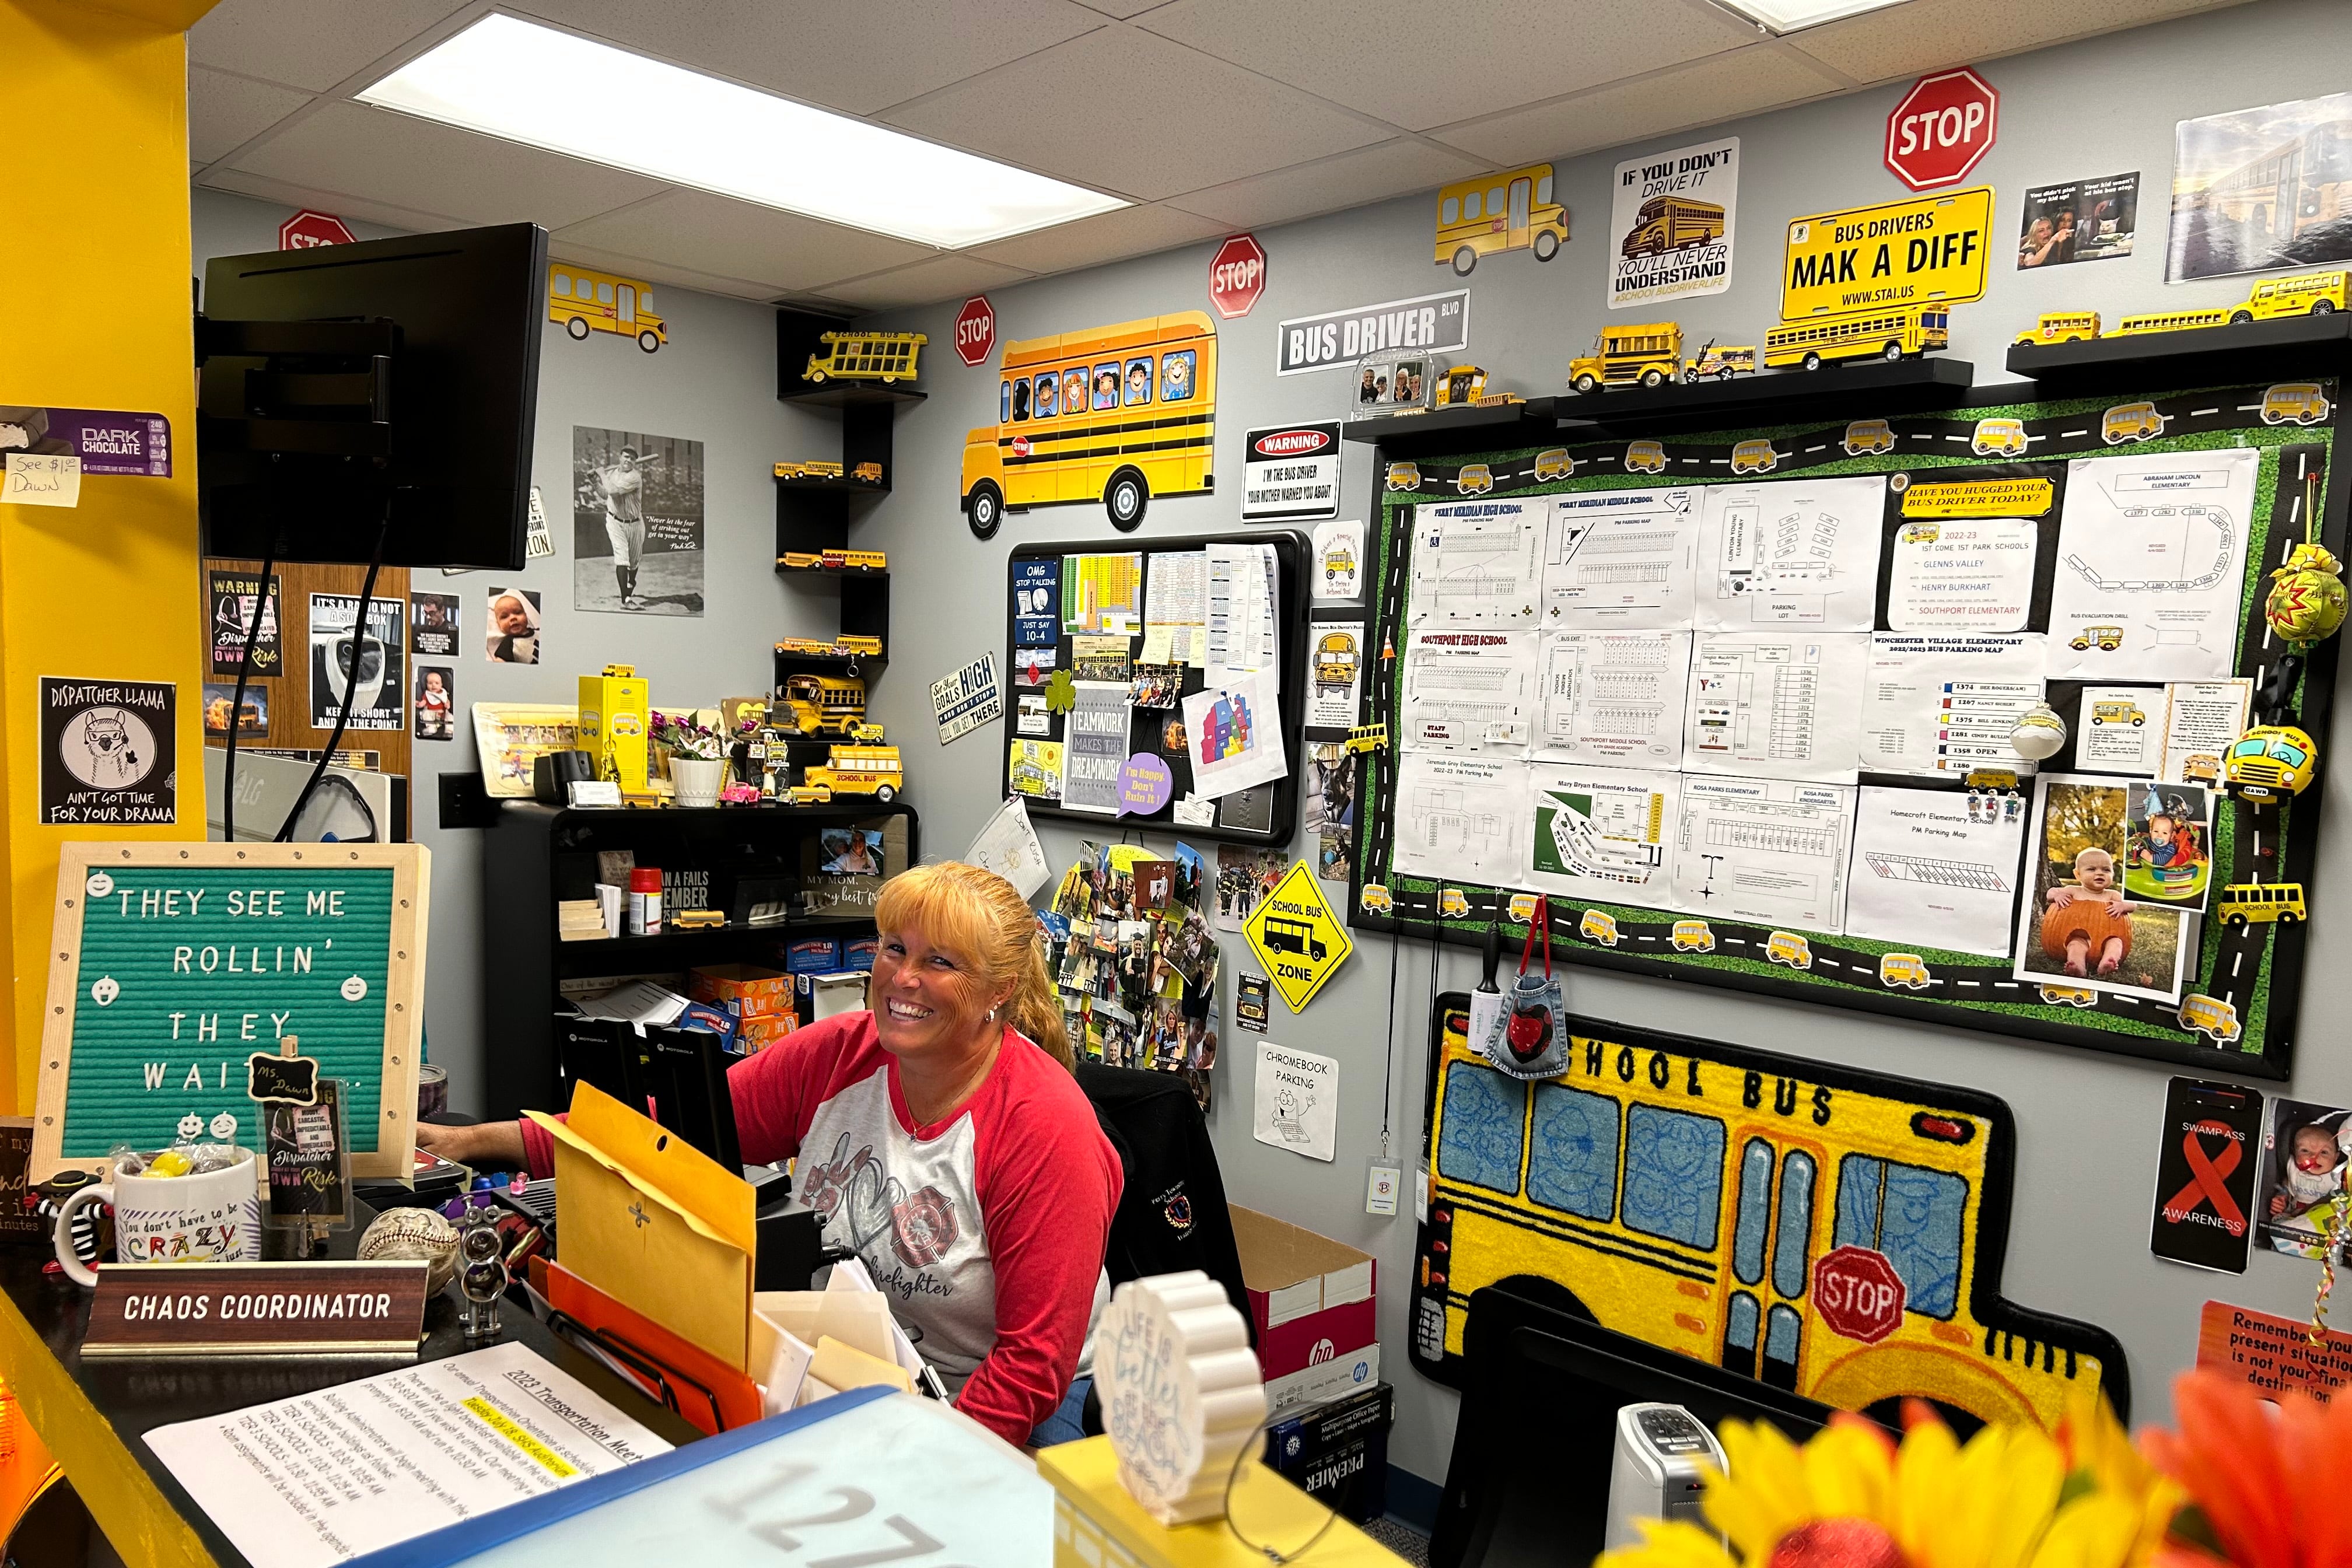 A woman in a white shirt with red sleeves smiles in a room decorated with yellow school buses.